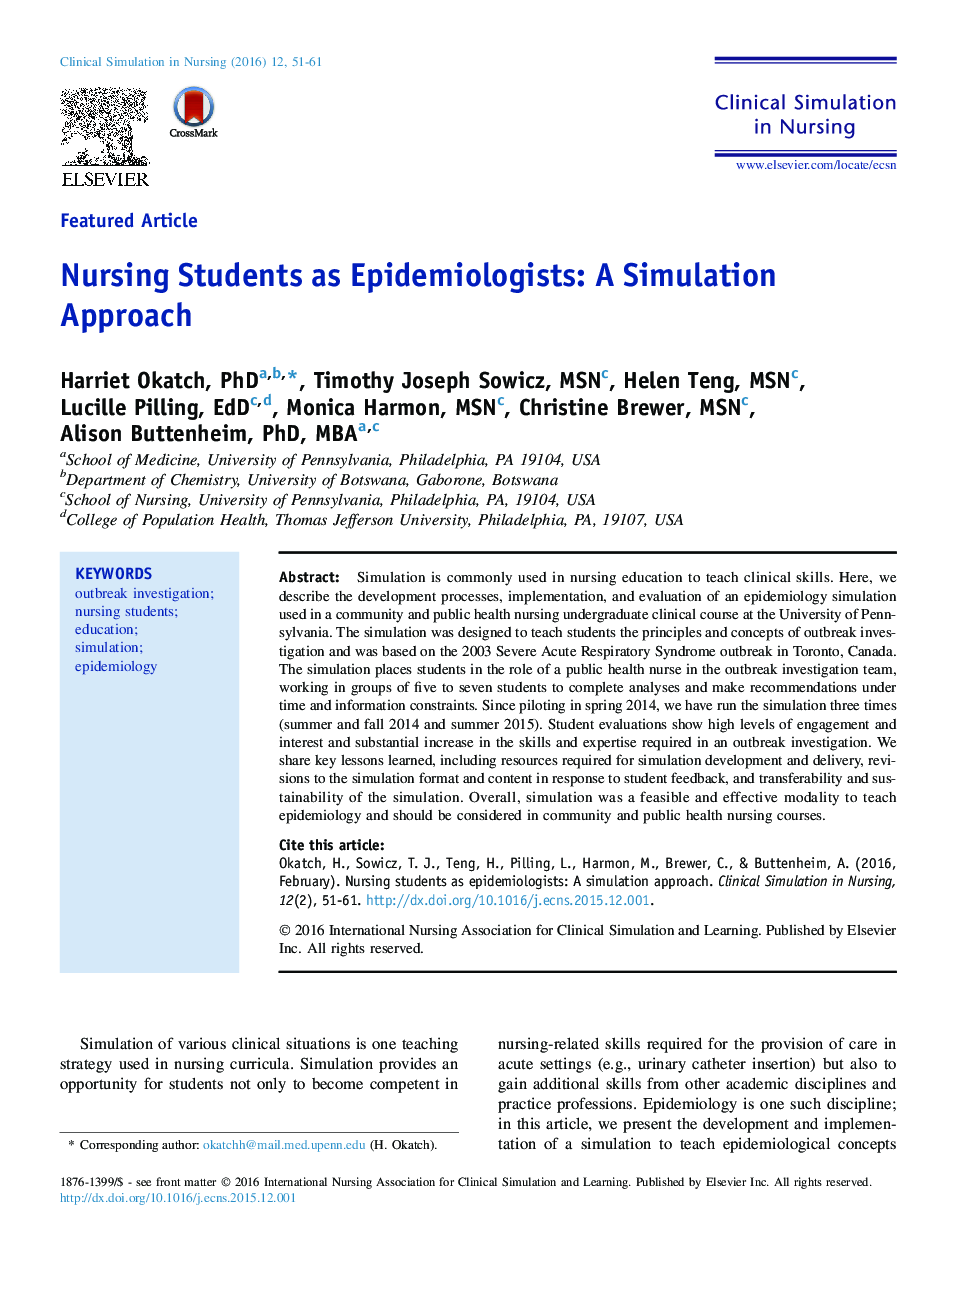 Nursing Students as Epidemiologists: A Simulation Approach